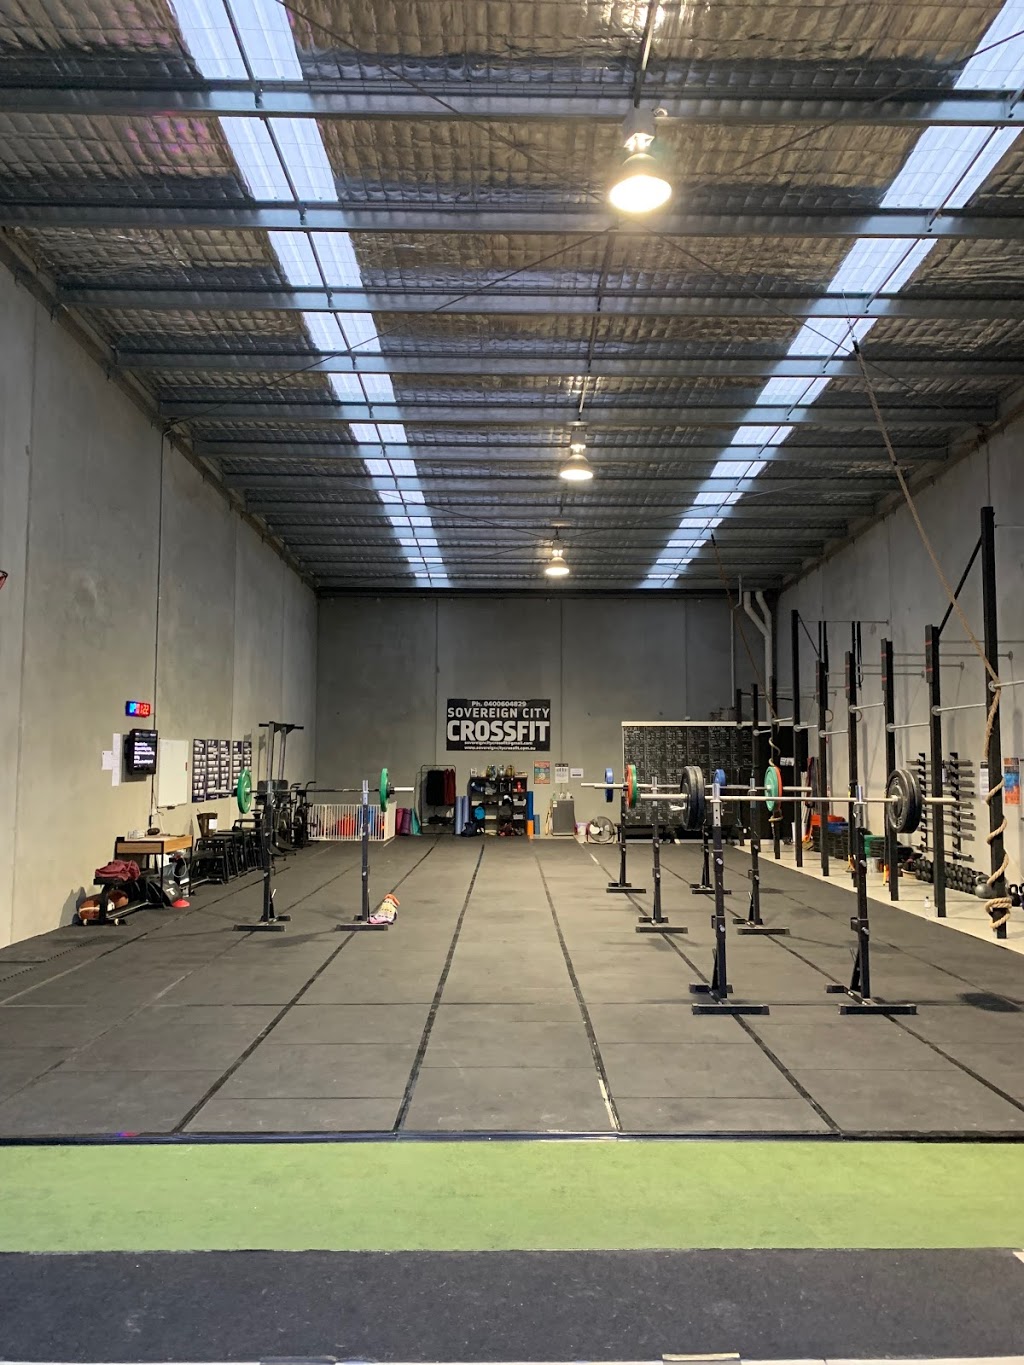 Sovereign City CrossFit | gym | 1/888 Humffray St S, Mount Pleasant VIC 3350, Australia | 0400604829 OR +61 400 604 829